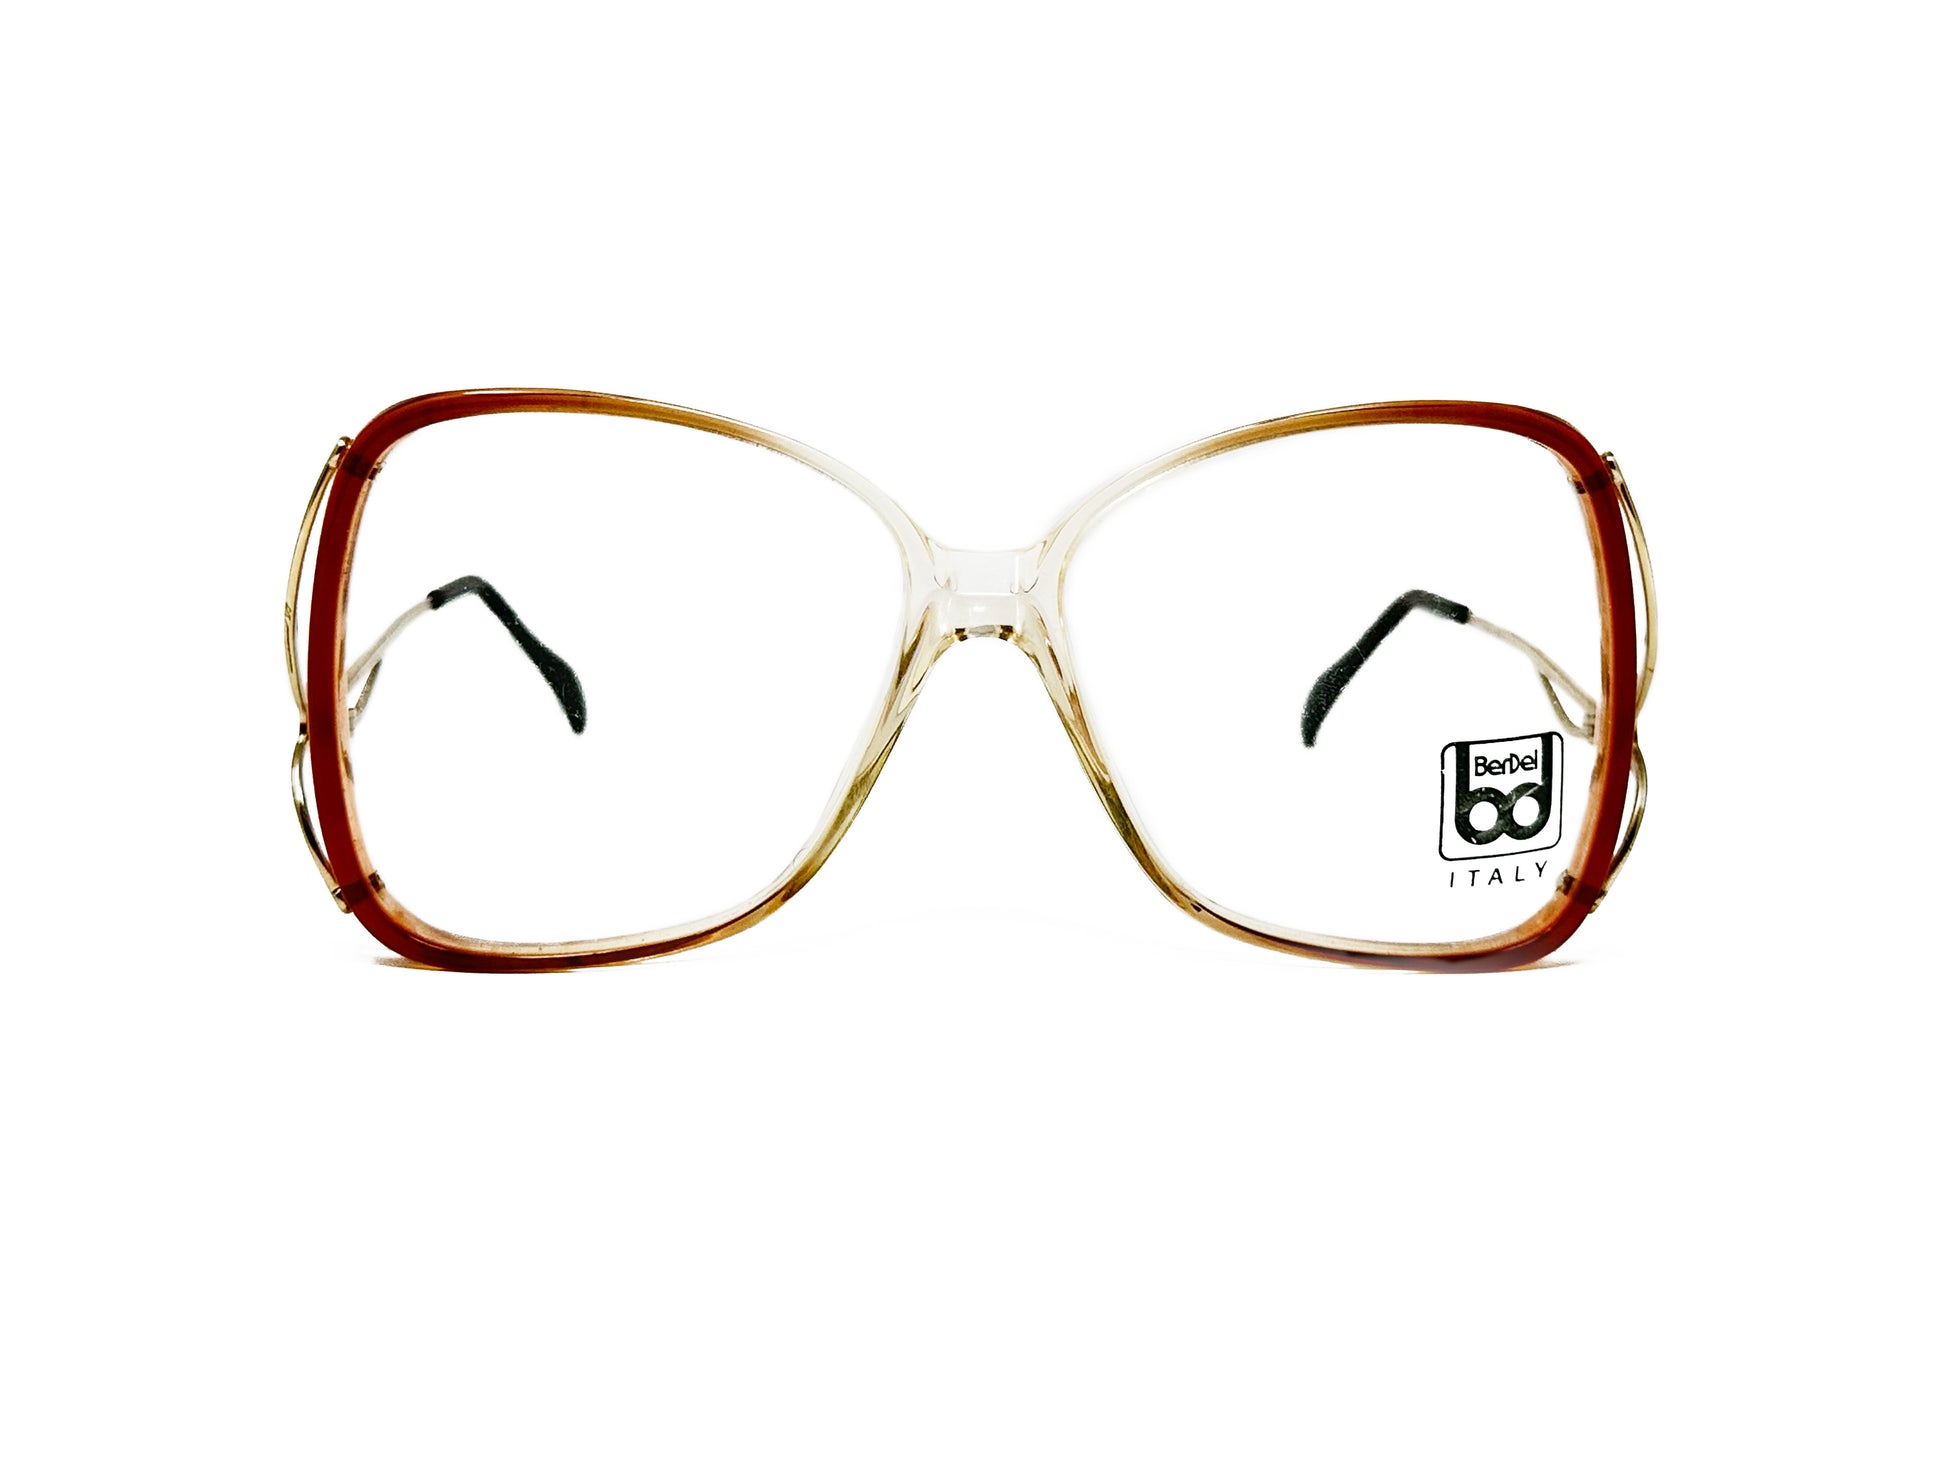 Berdel acetate, butterfly, optical frame. Model: 4079. Color: 076 - Transparent center to brown gradient. Front view. 